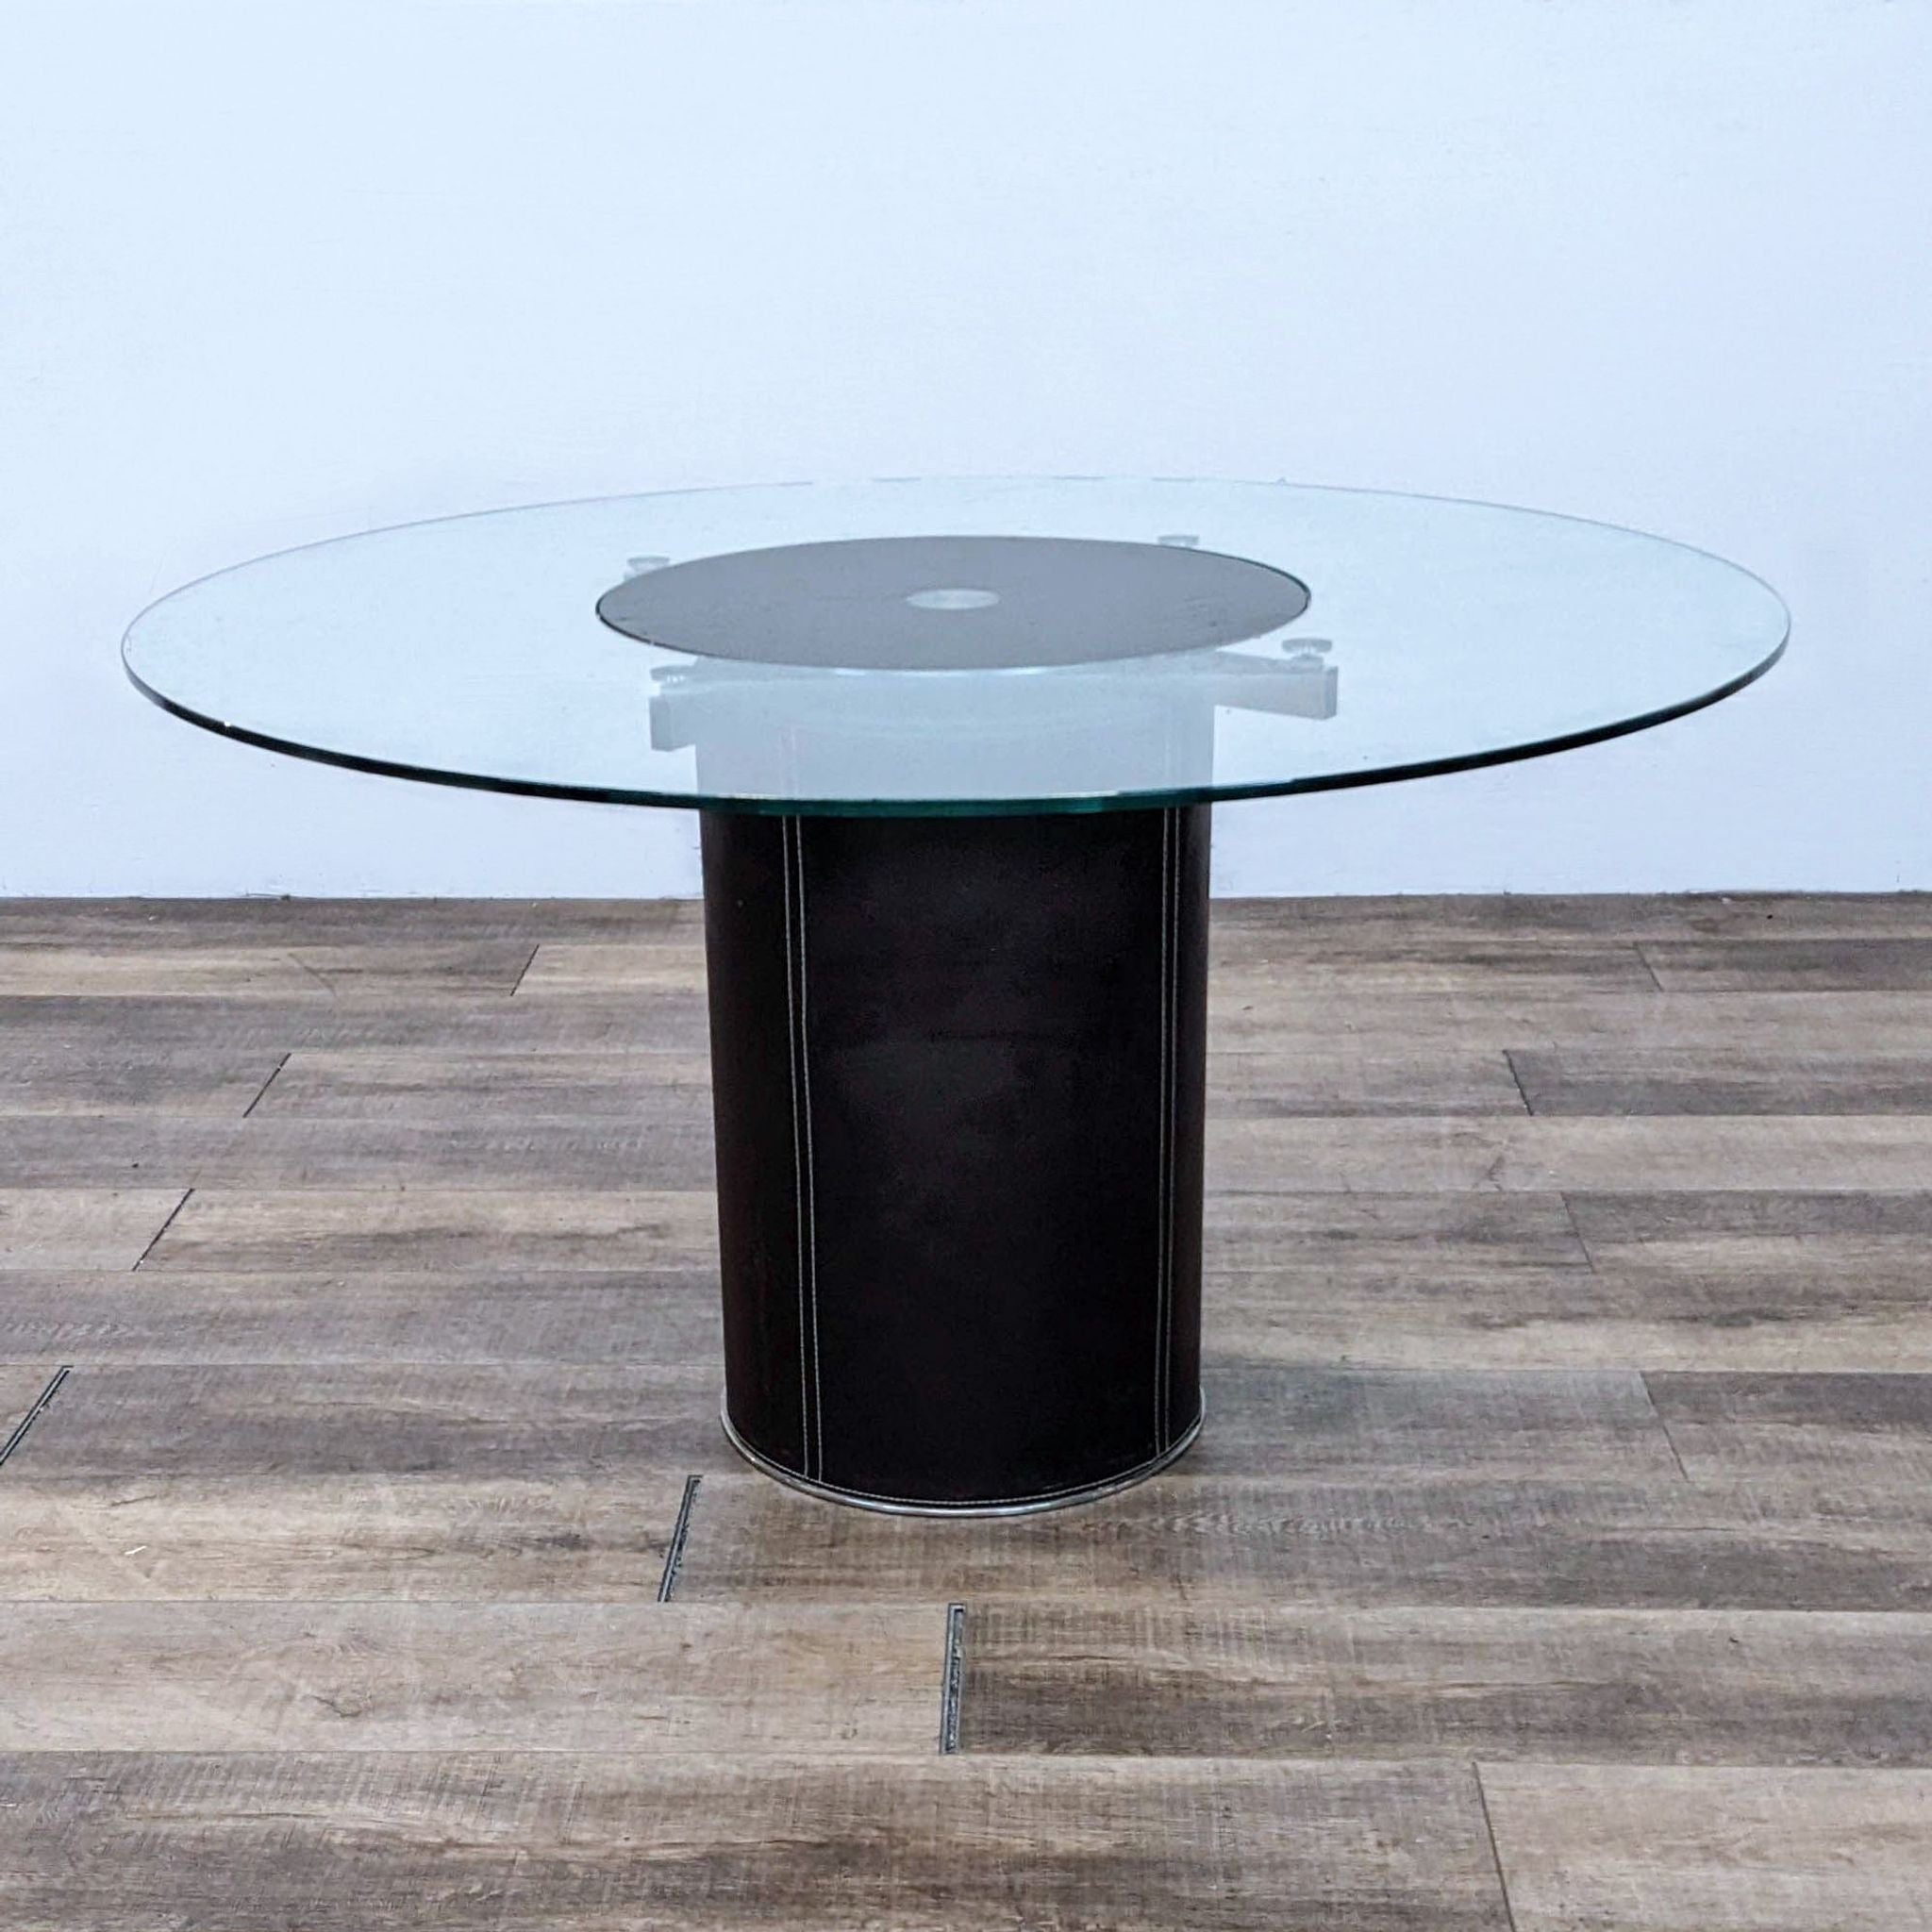 Round Lauss dining table from Scandinavian Designs with stainless steel base, leather wrap, and a revolving glass top.